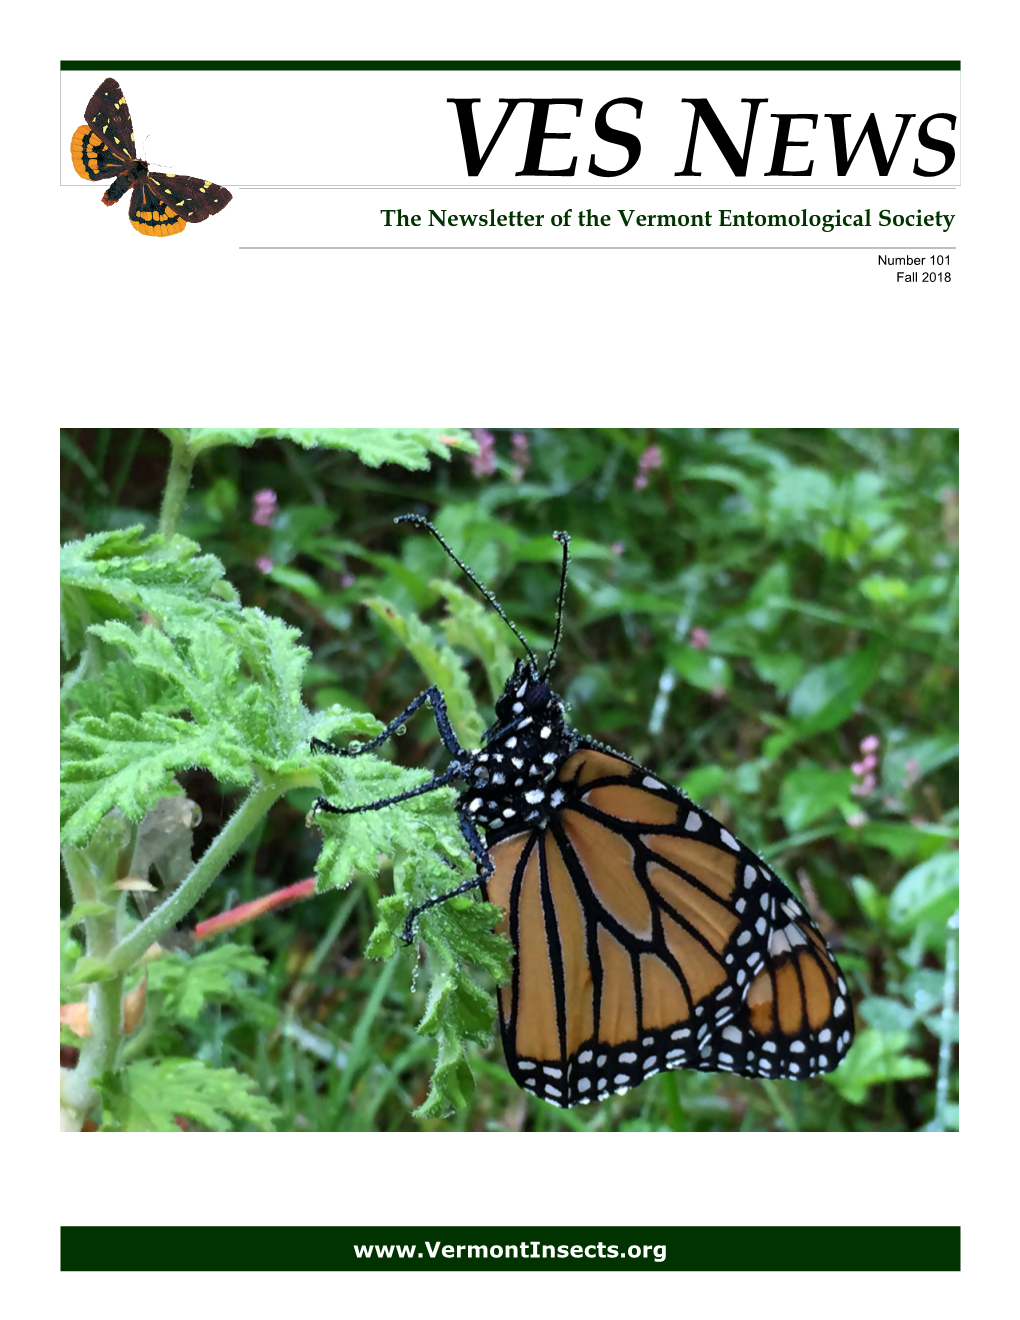 VES NEWS the Newsletter of the Vermont Entomological Society